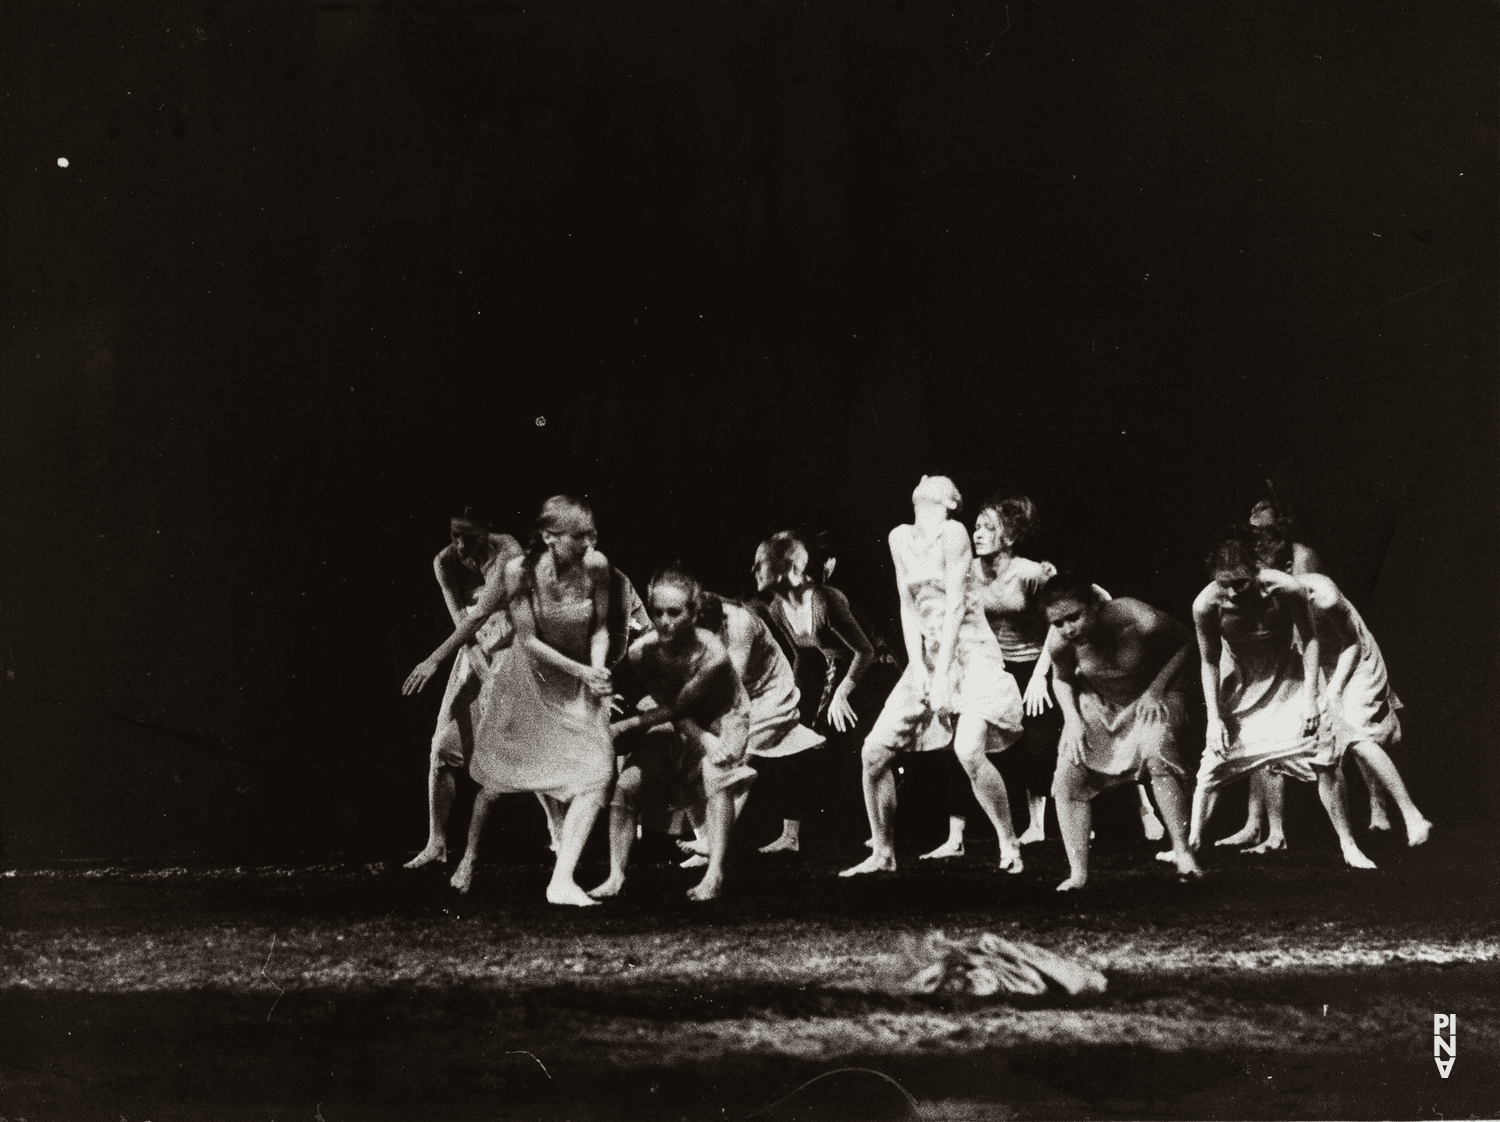 Josephine Ann Endicott in “The Rite of Spring” by Pina Bausch